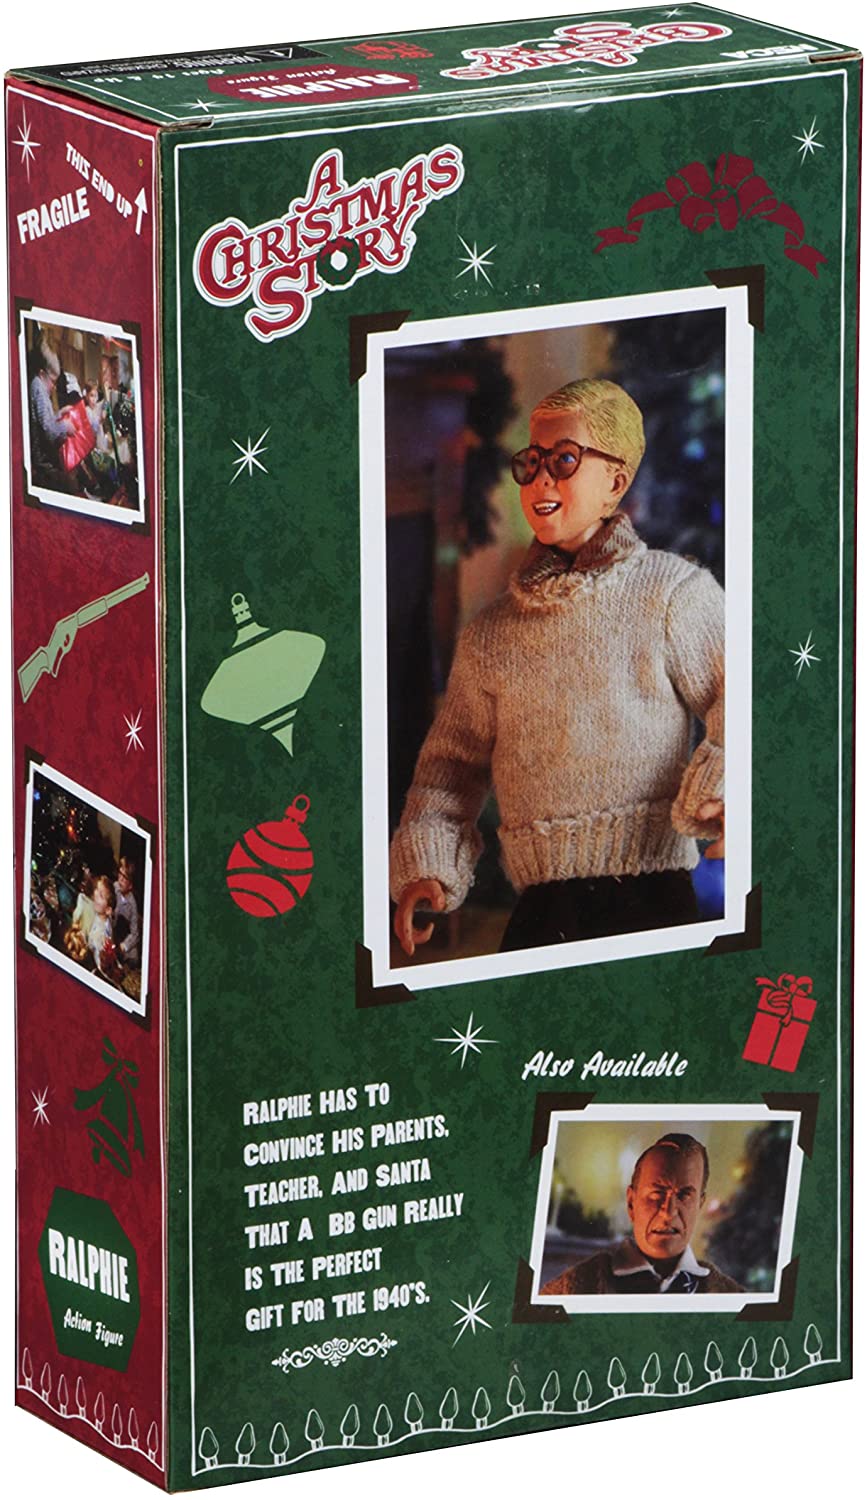 NECA - A Christmas Story - Ralphie 8" Clothed Action Figure - Zlc Collectibles